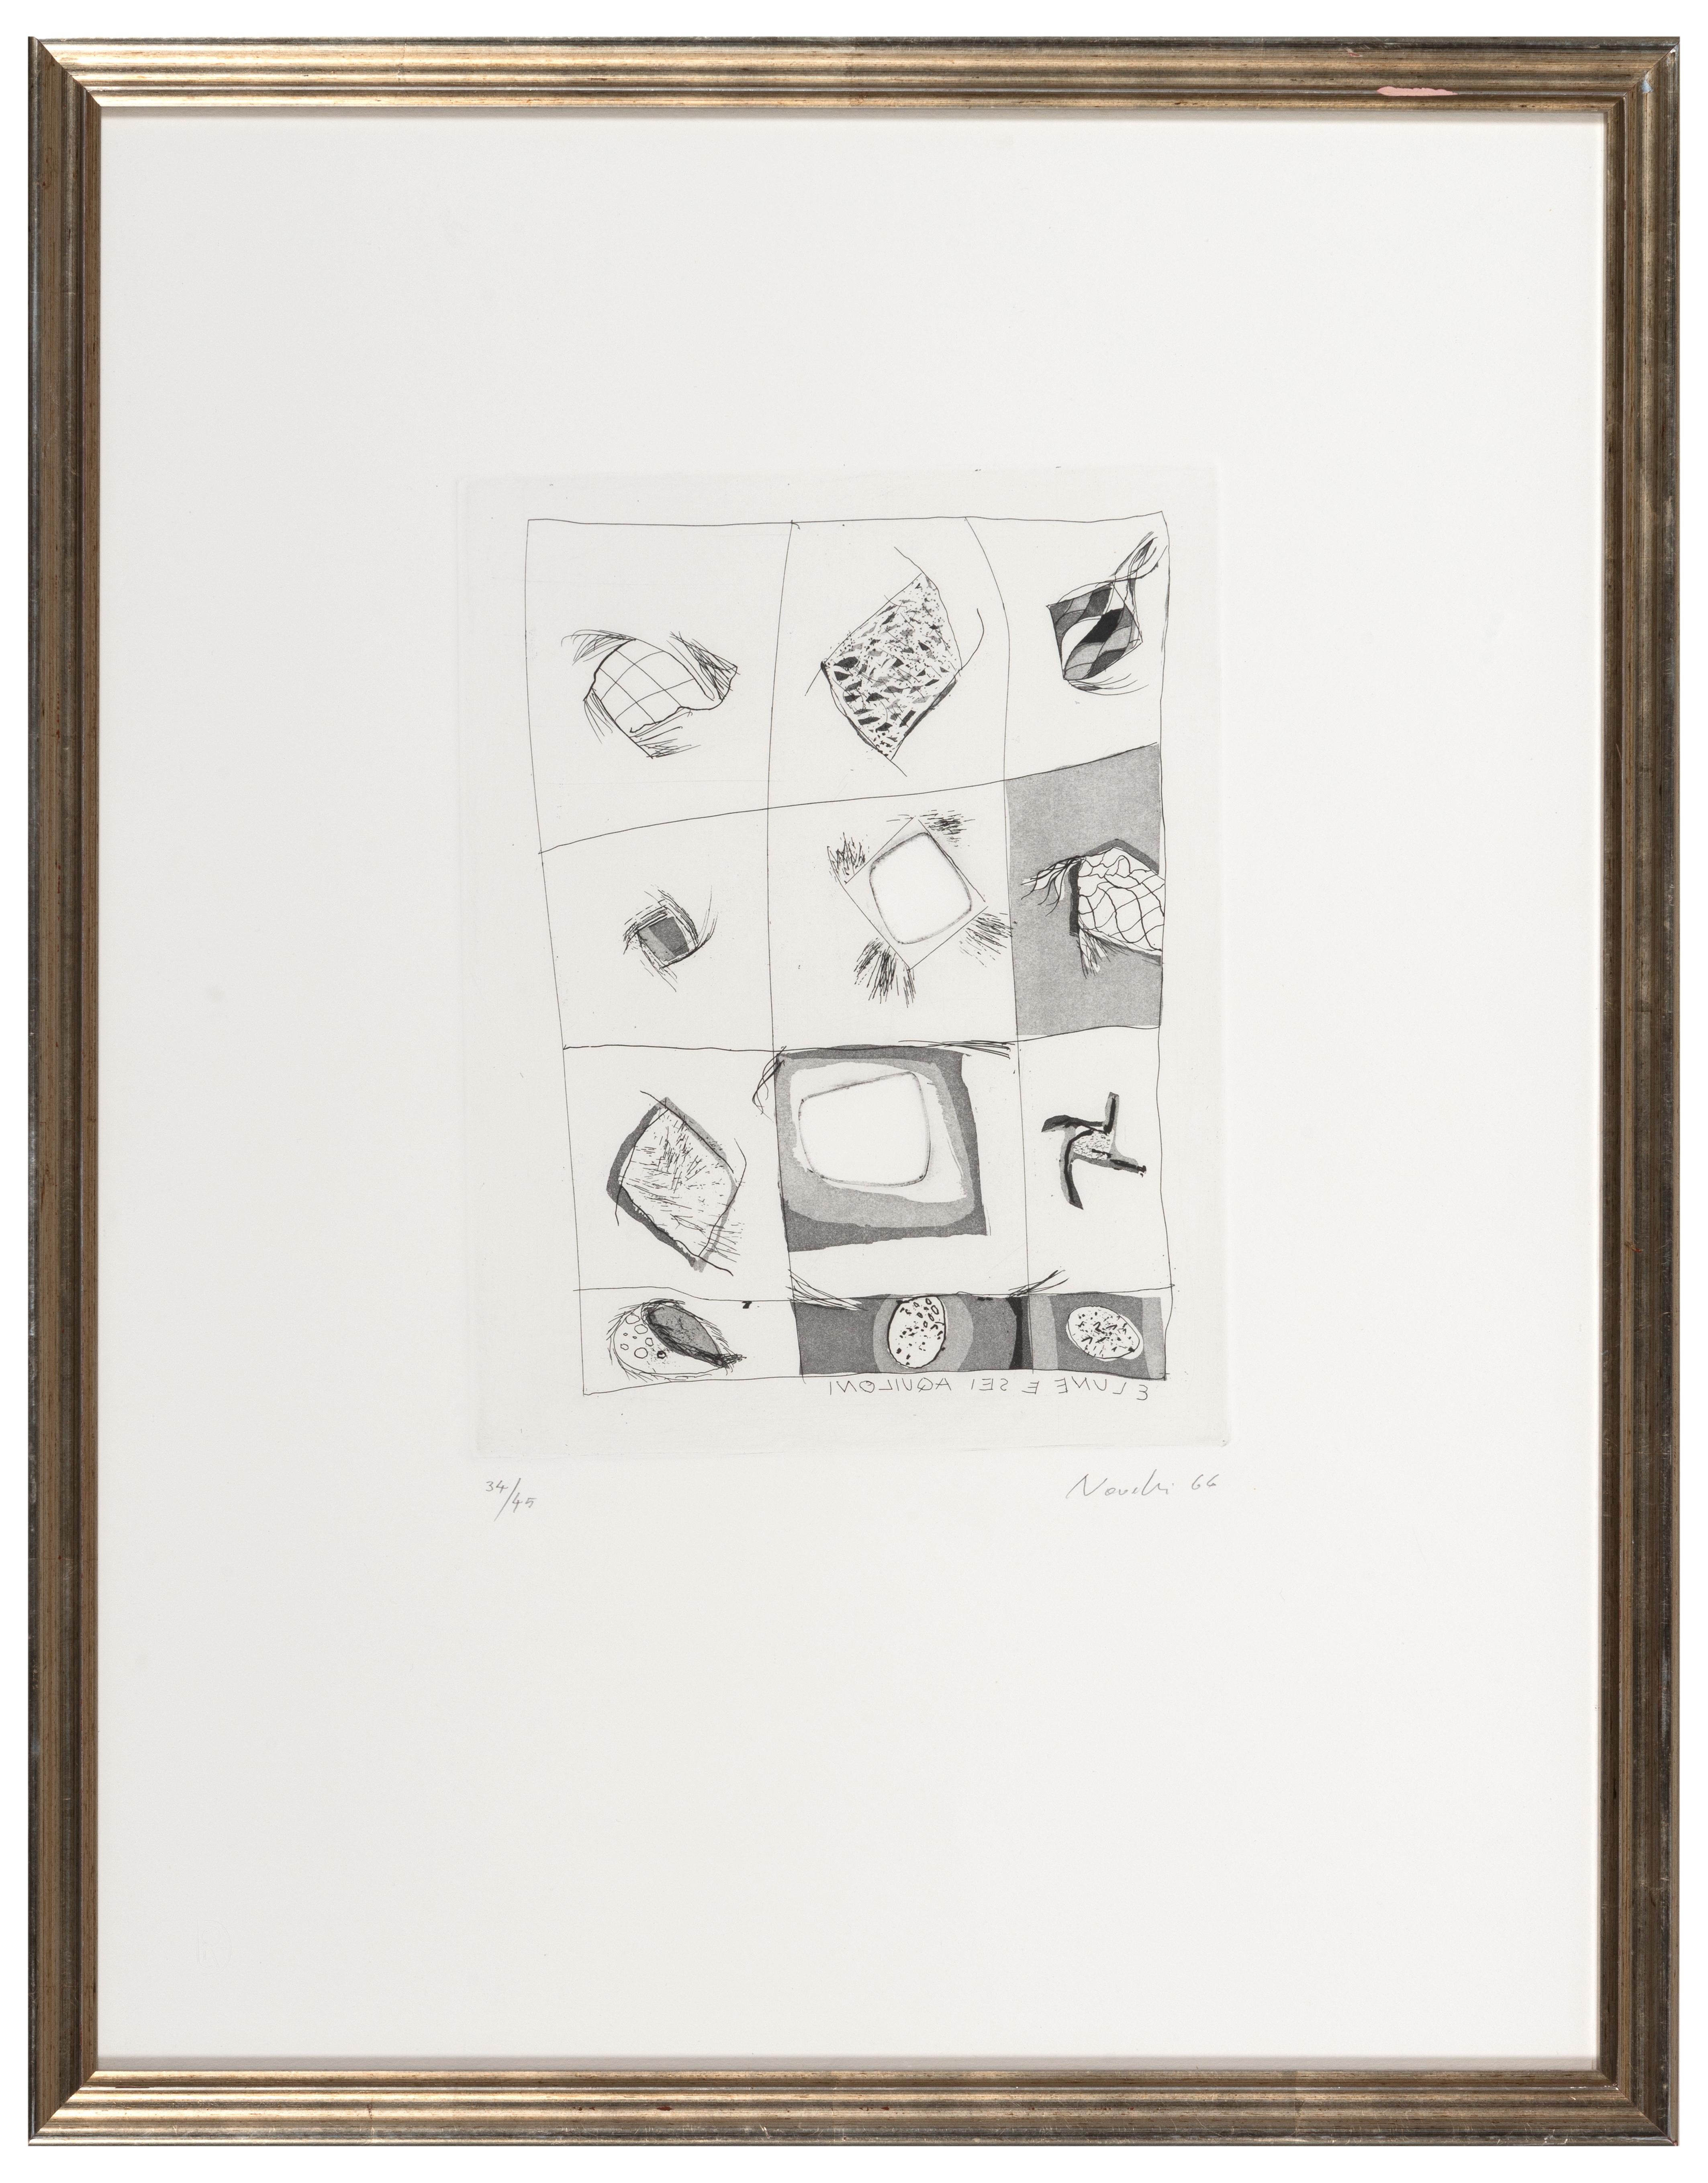 Rare edition by Italian artist Gastone Novelli, executed in 1966.
Signed and dated ‘Novelli 66', on the lower right; the title is on the matrix in reverse on the left, numbered on the lower left.

Exhibitions: Bolzano, Galleria Il Sole, Novelli, 18